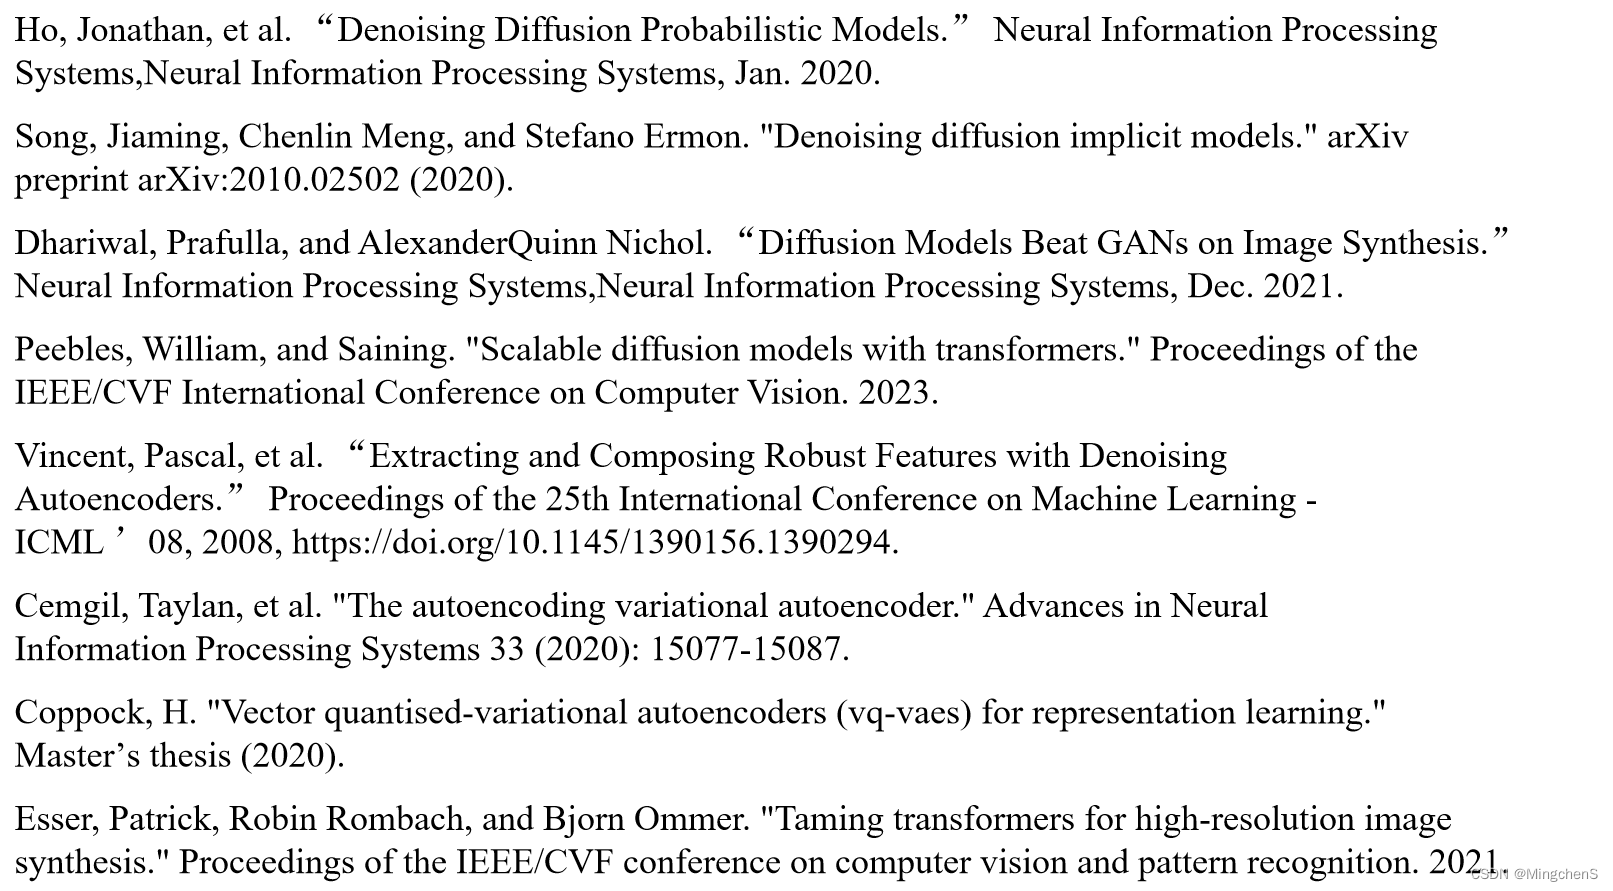 Deconstructing Denoising Diffusion Models for Self-Supervised Learning解读（超详细）